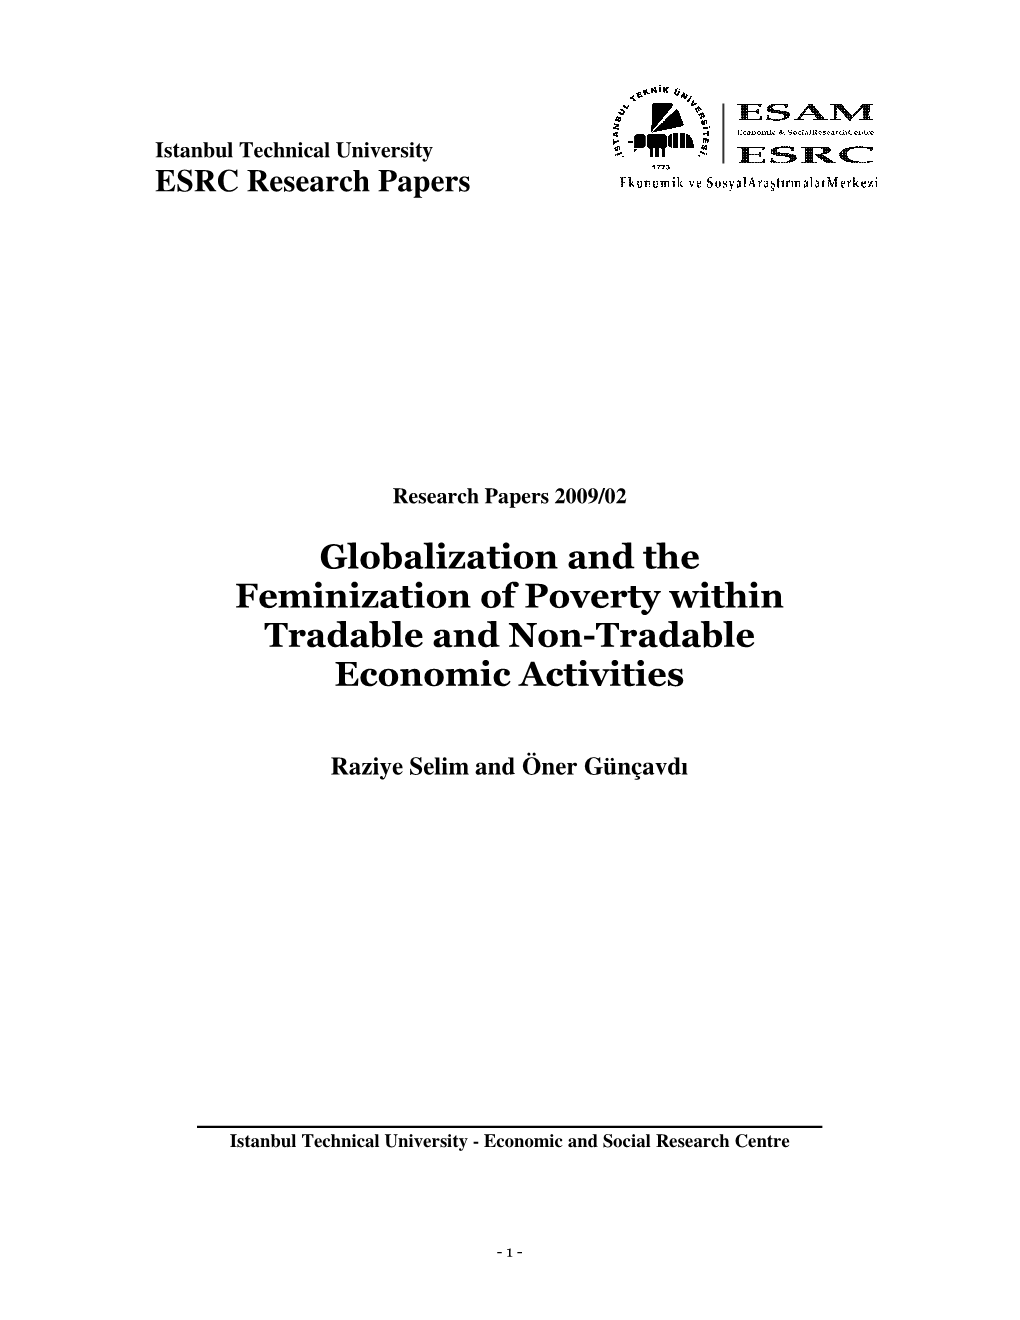 Globalization and the Feminization of Poverty Within Tradable and Non-Tradable Economic Activities